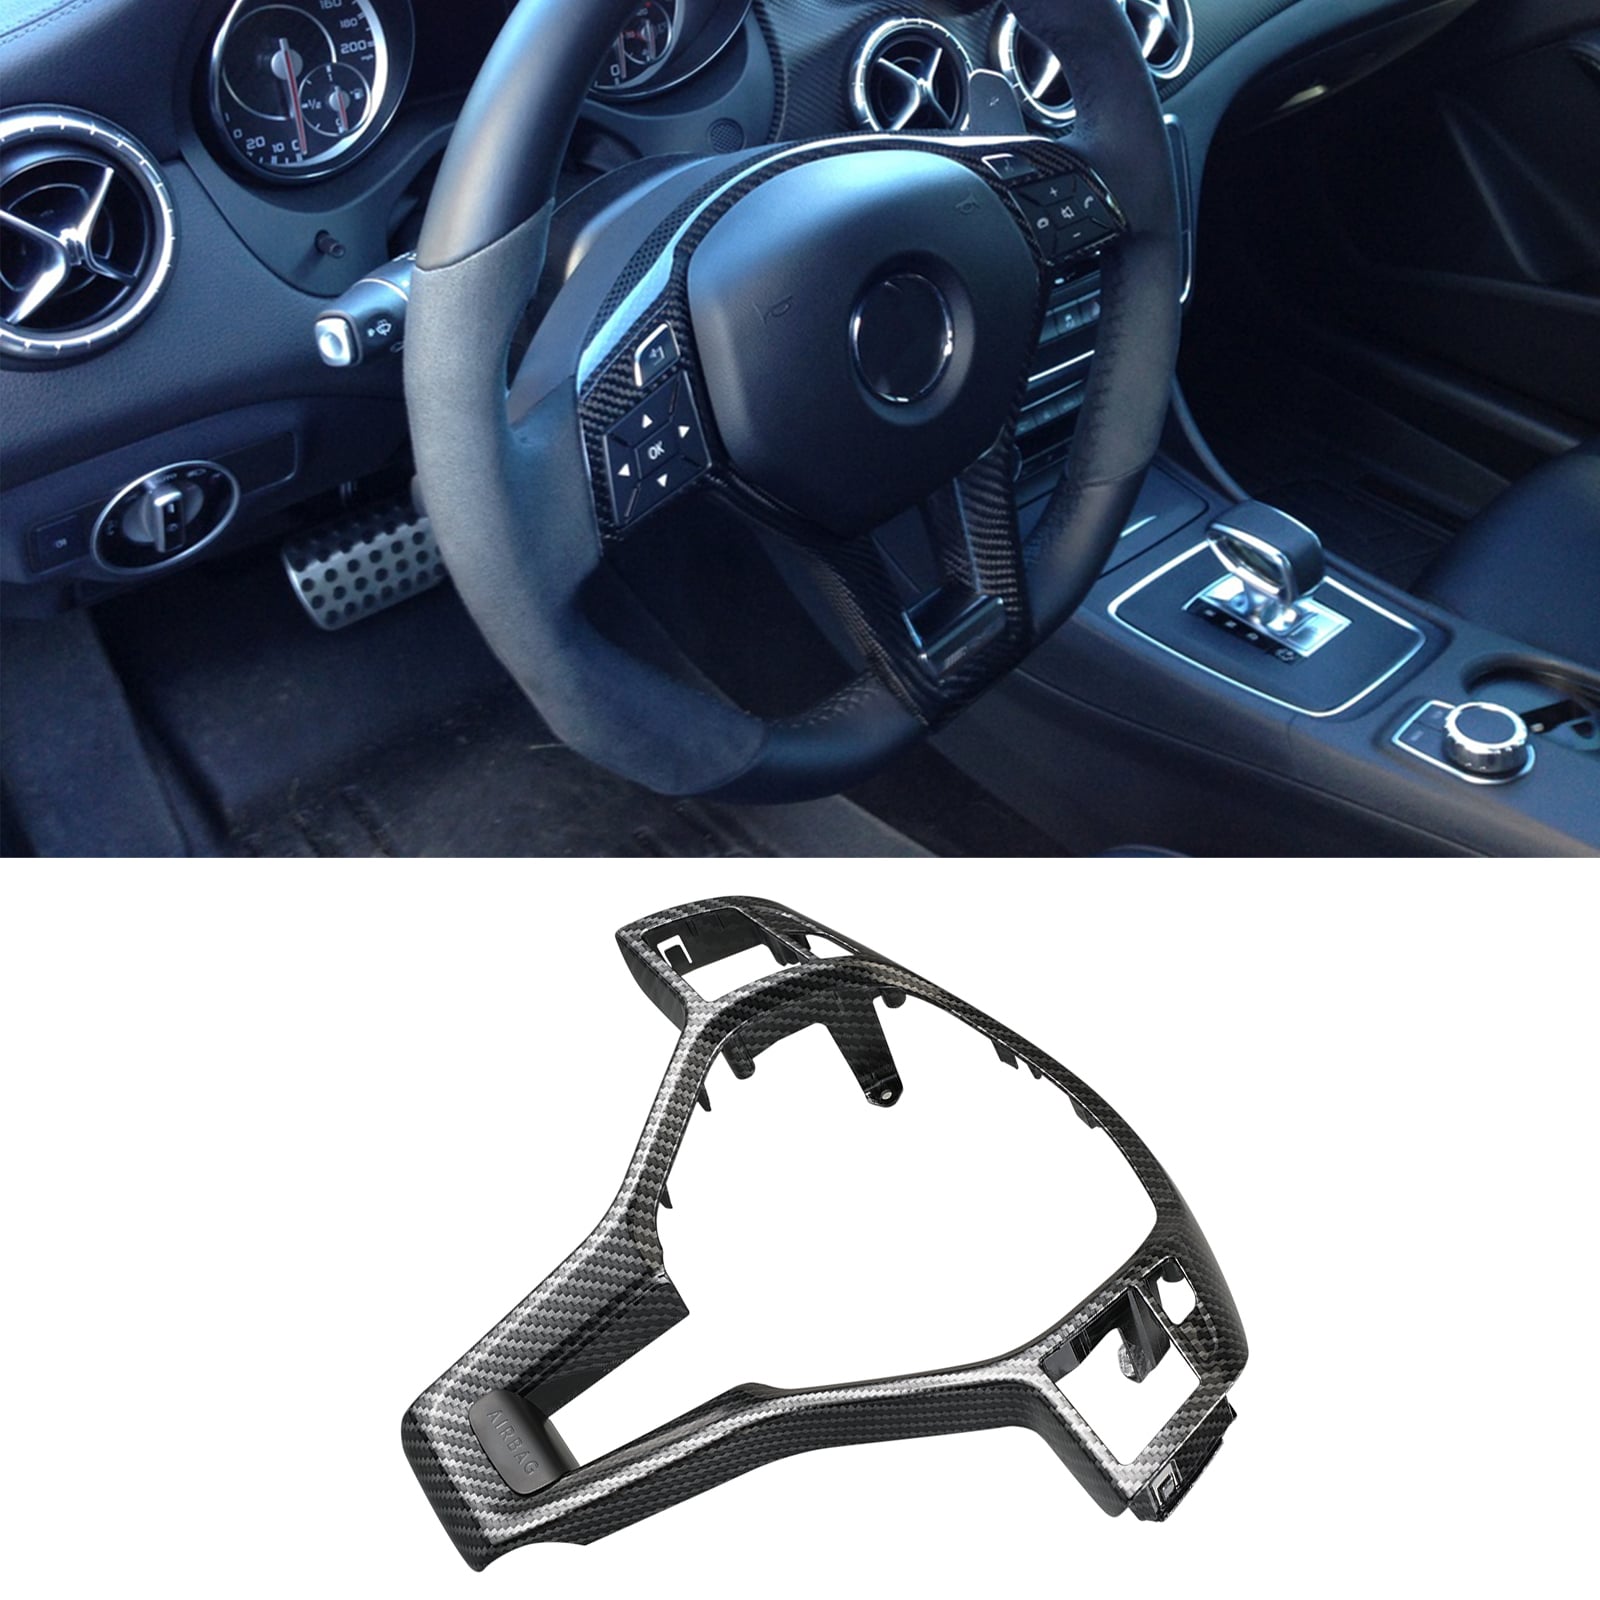 Mercedes AMG Steering Wheel Decoration Cover Trim for Benz C-Class